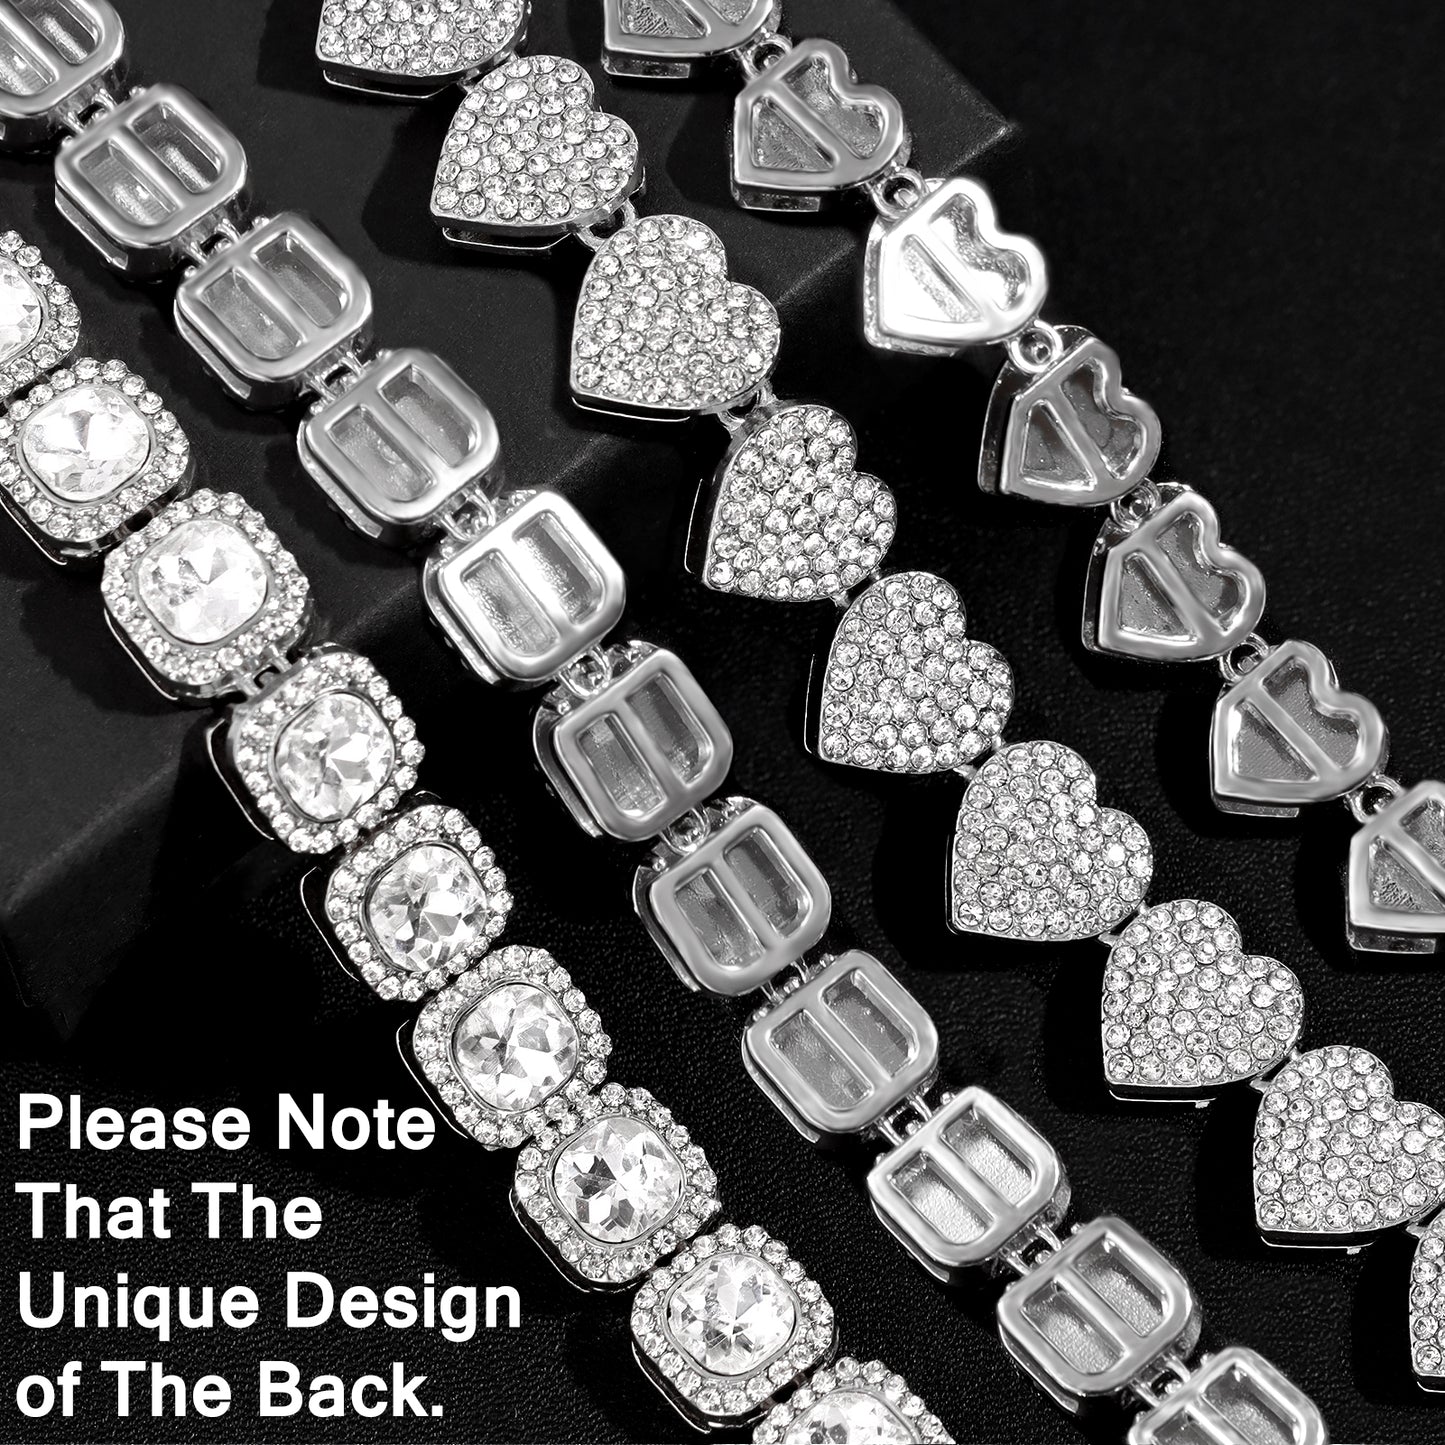 Iced Chain Heart Necklaces  Women Miami Cuban Link Chain